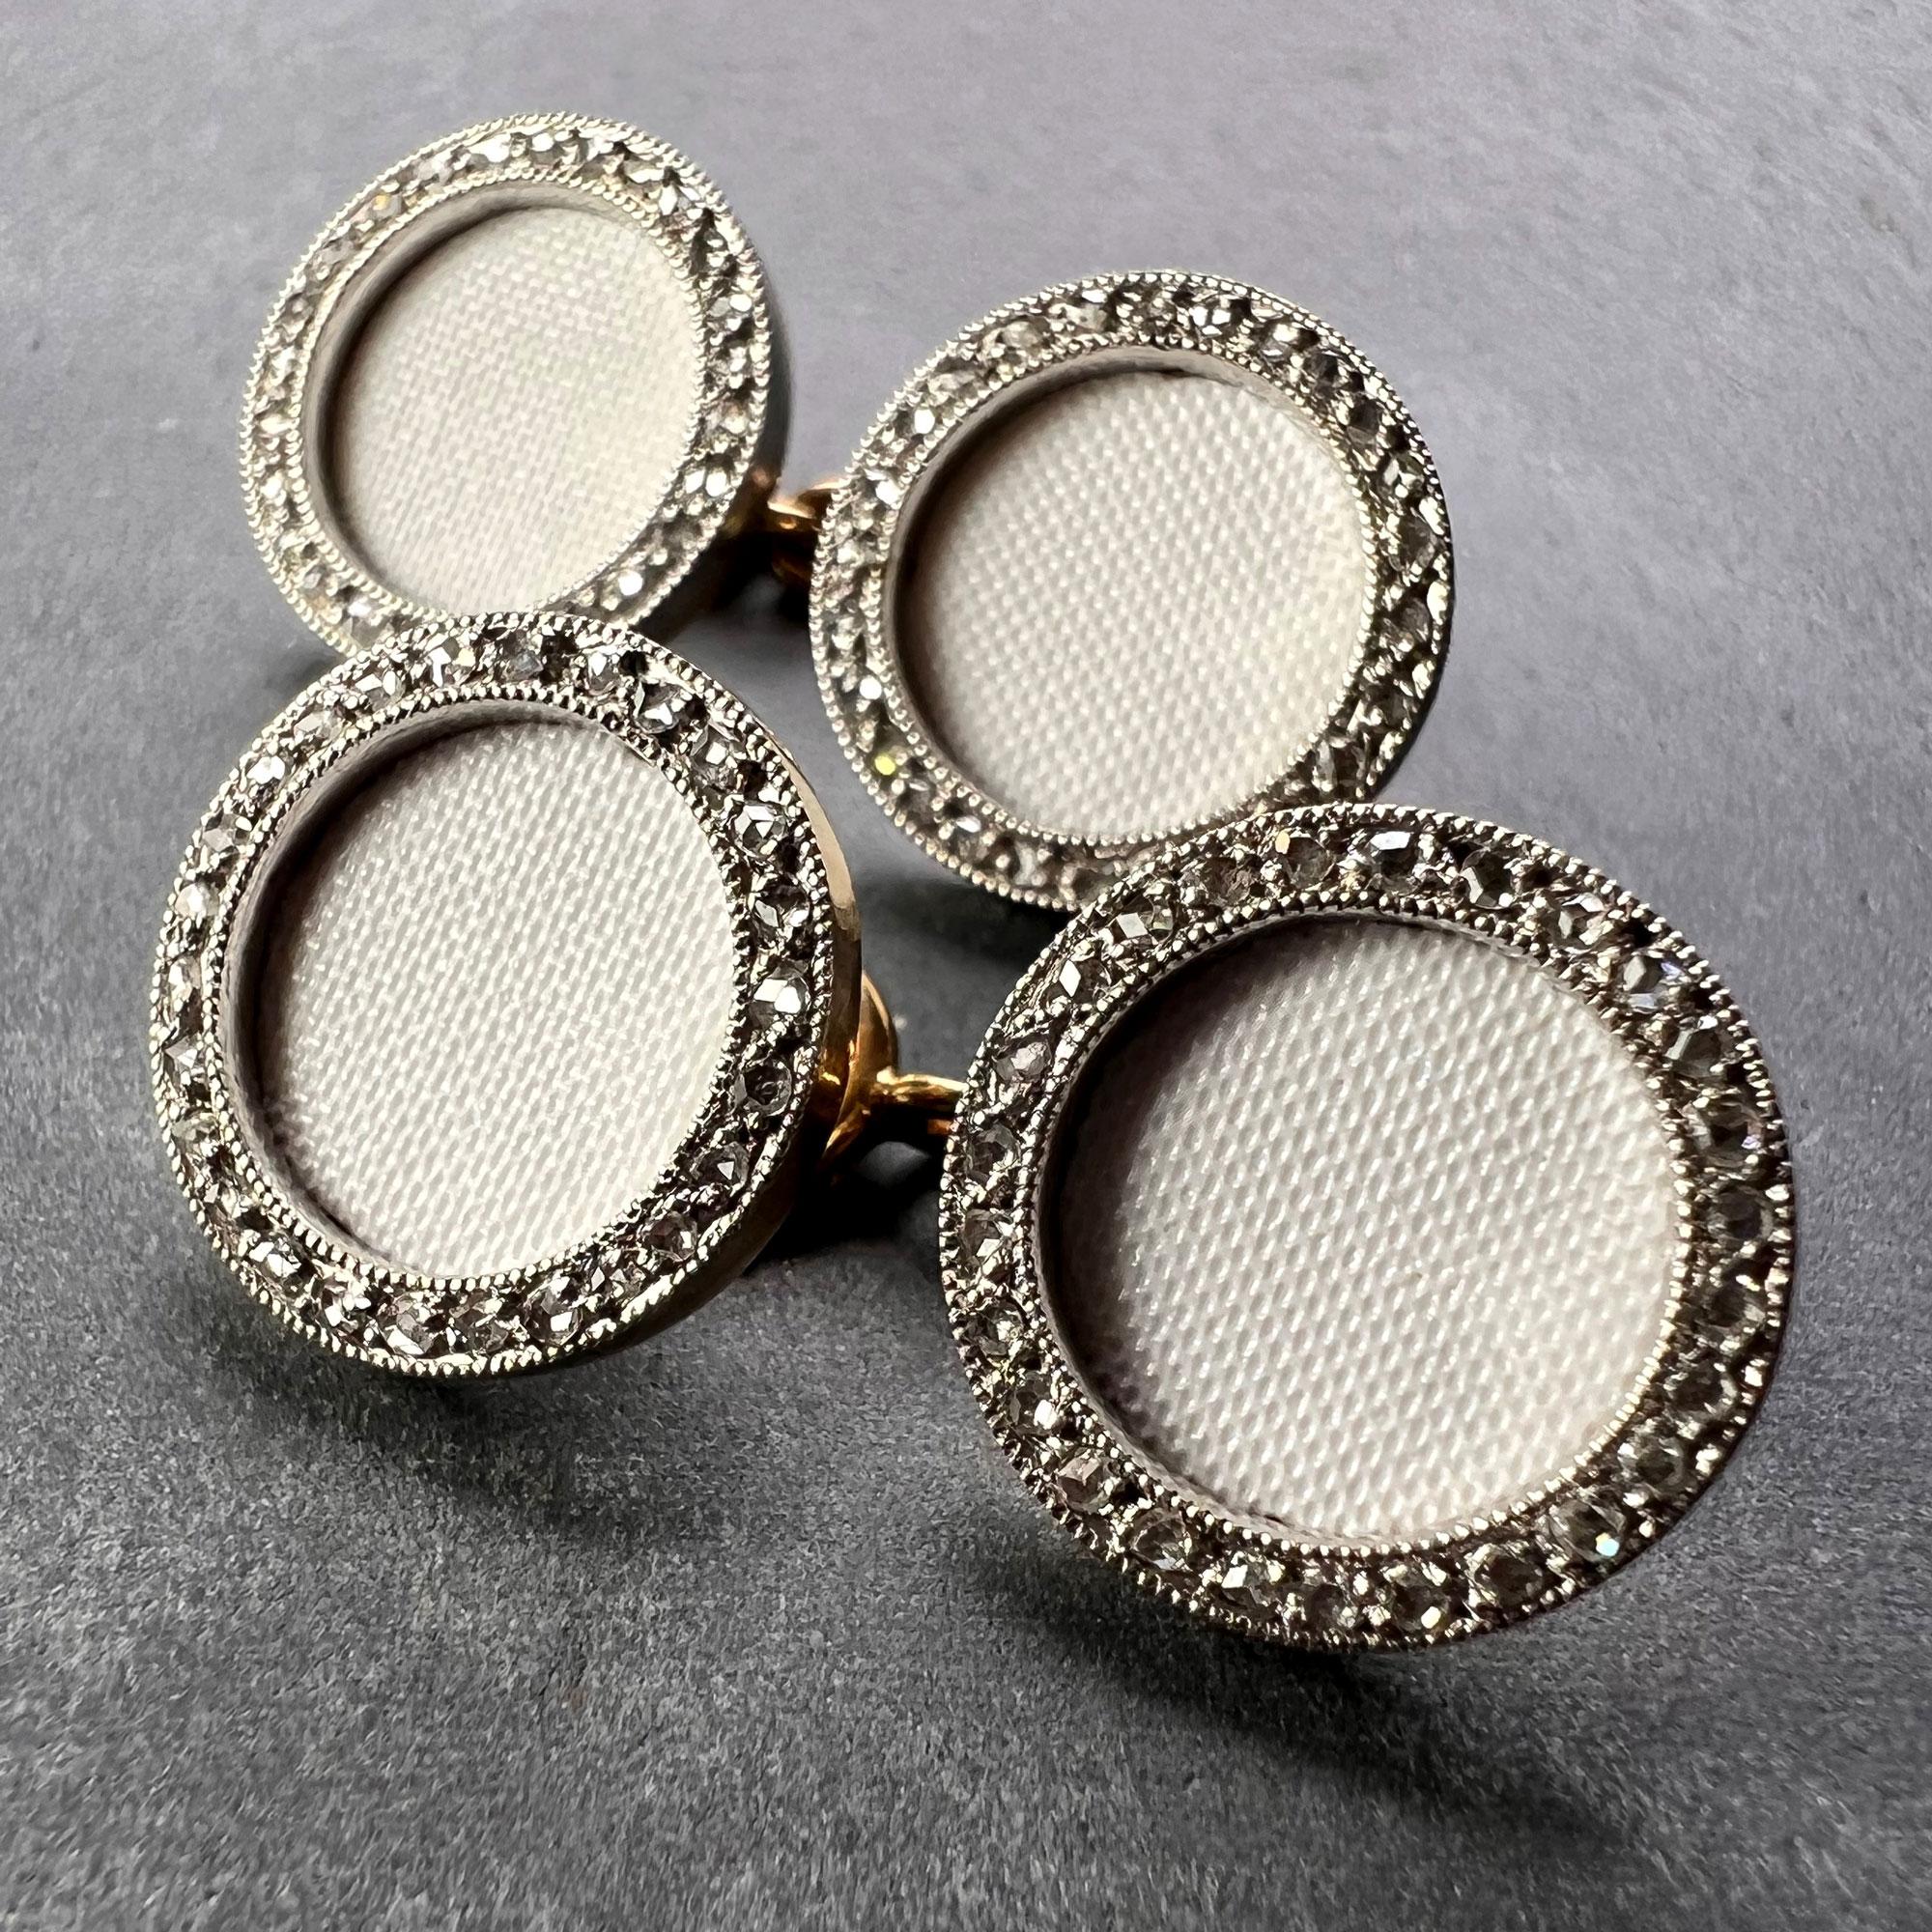 A pair of French 18K (18 karat) yellow gold cufflinks designed as a pair of circular disc with a recessed textured white enamel centre surrounded by platinum set with rose-cut diamonds. Stamped with the eagle’s head for French manufacture and 18